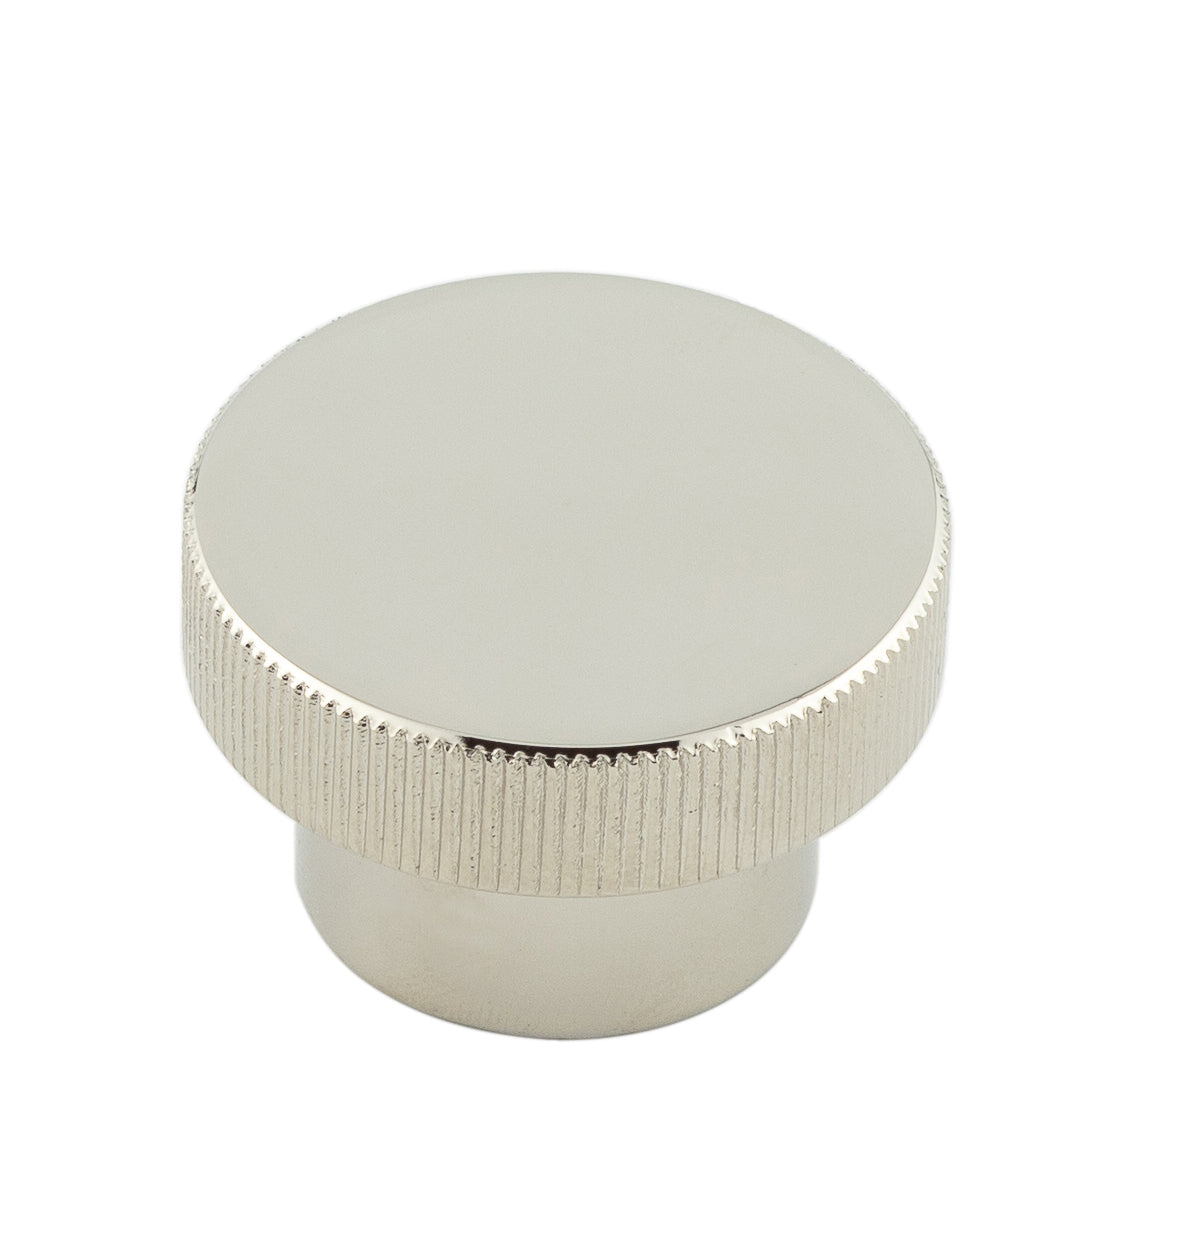 Hoxton Thaxted Cupboard Knobs 40mm